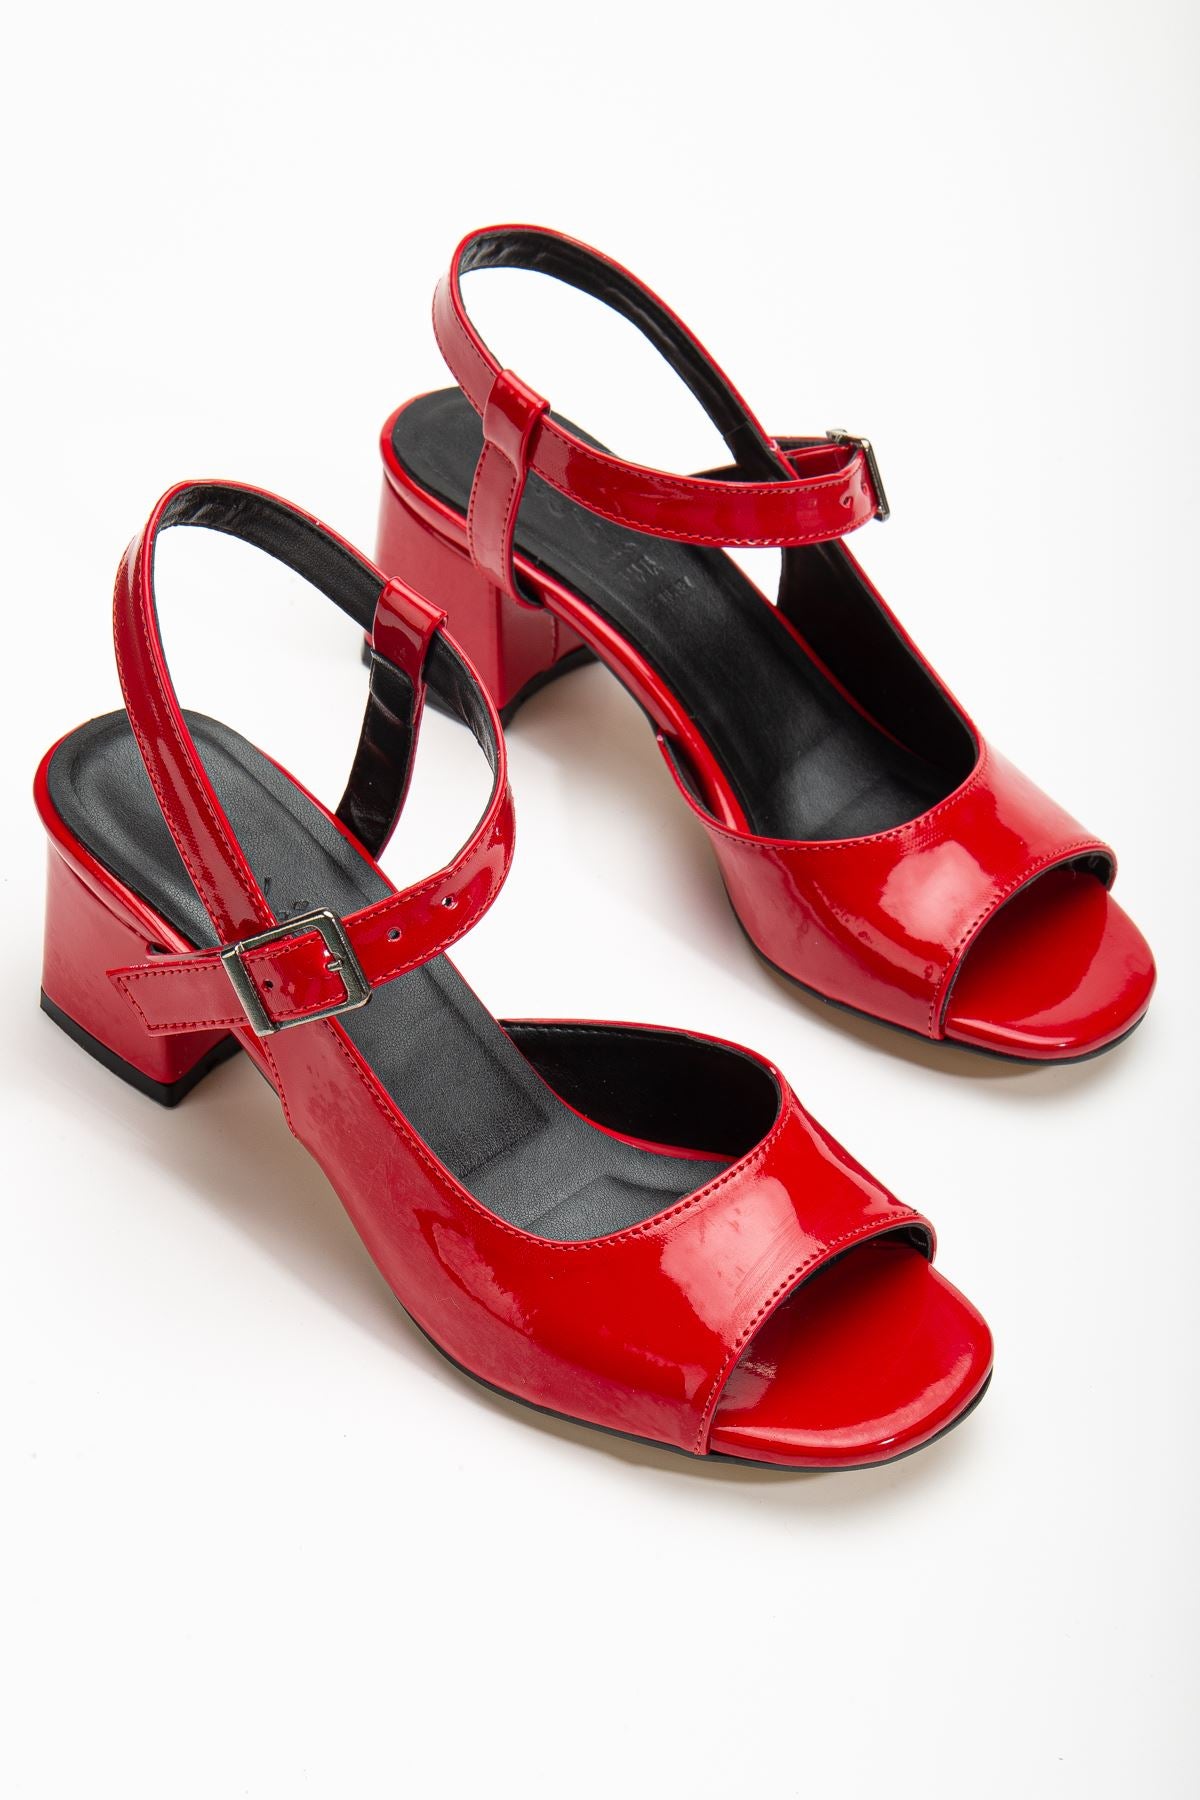 Keri Heeled Red Patent Leather Blunt Toe Women's Shoes - STREETMODE™